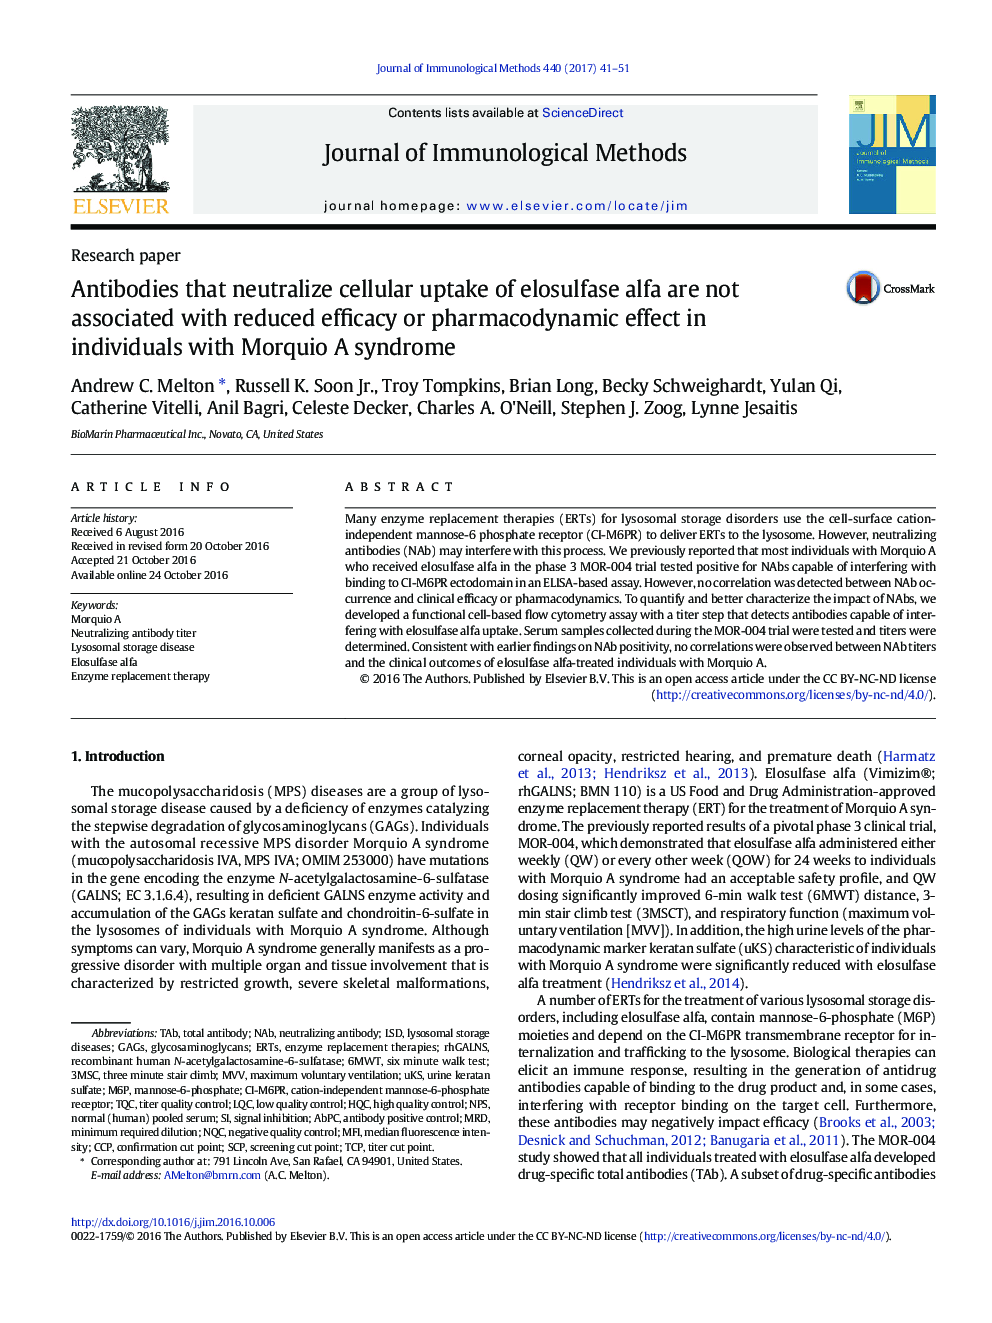 Antibodies that neutralize cellular uptake of elosulfase alfa are not associated with reduced efficacy or pharmacodynamic effect in individuals with Morquio A syndrome